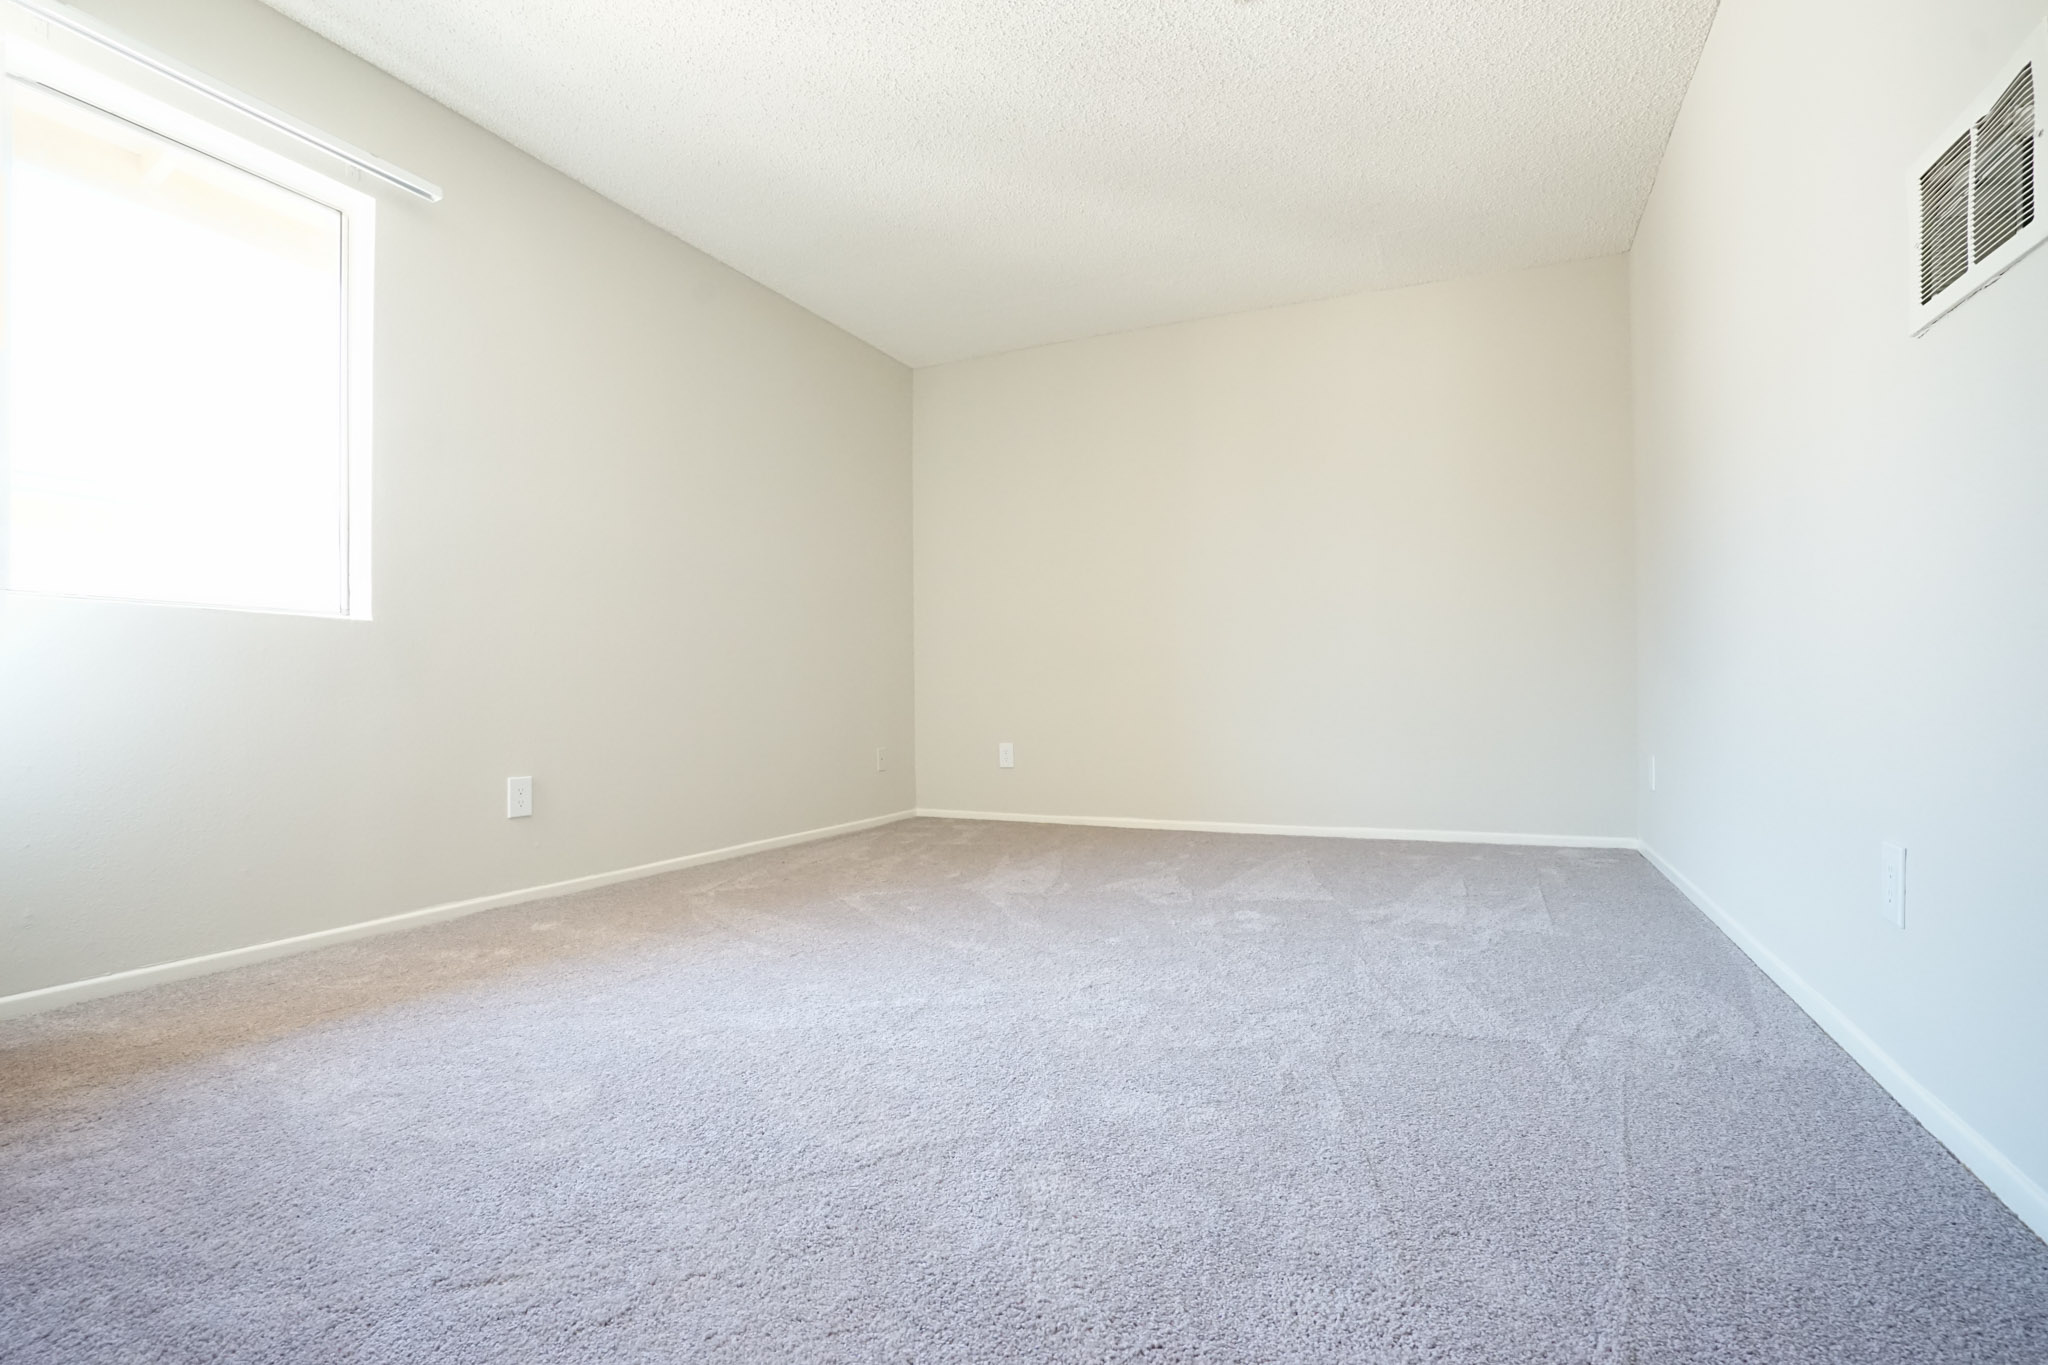 View of a bedroom with carpeted floor and a window with blinds.